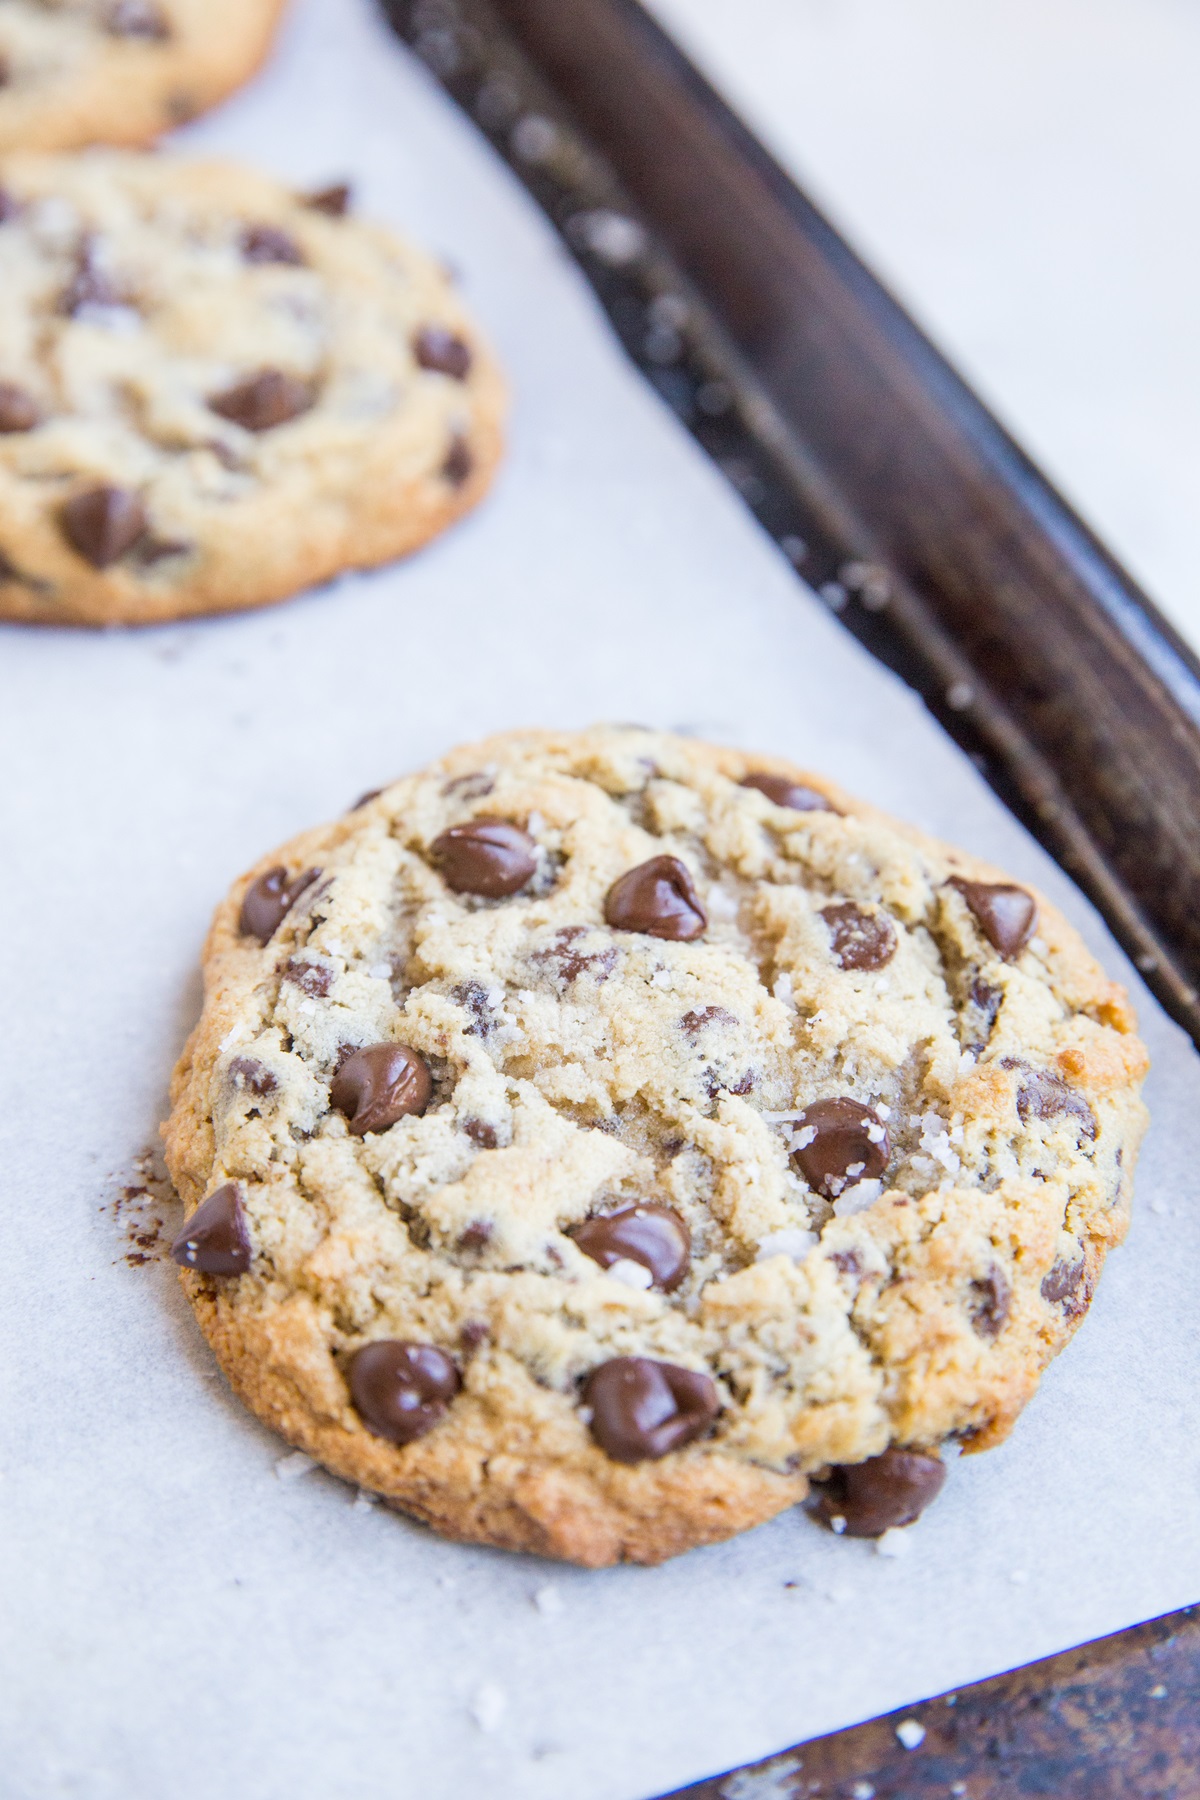 https://www.theroastedroot.net/wp-content/uploads/2023/03/chewy-keto-chocolate-chip-cookies-4.jpg